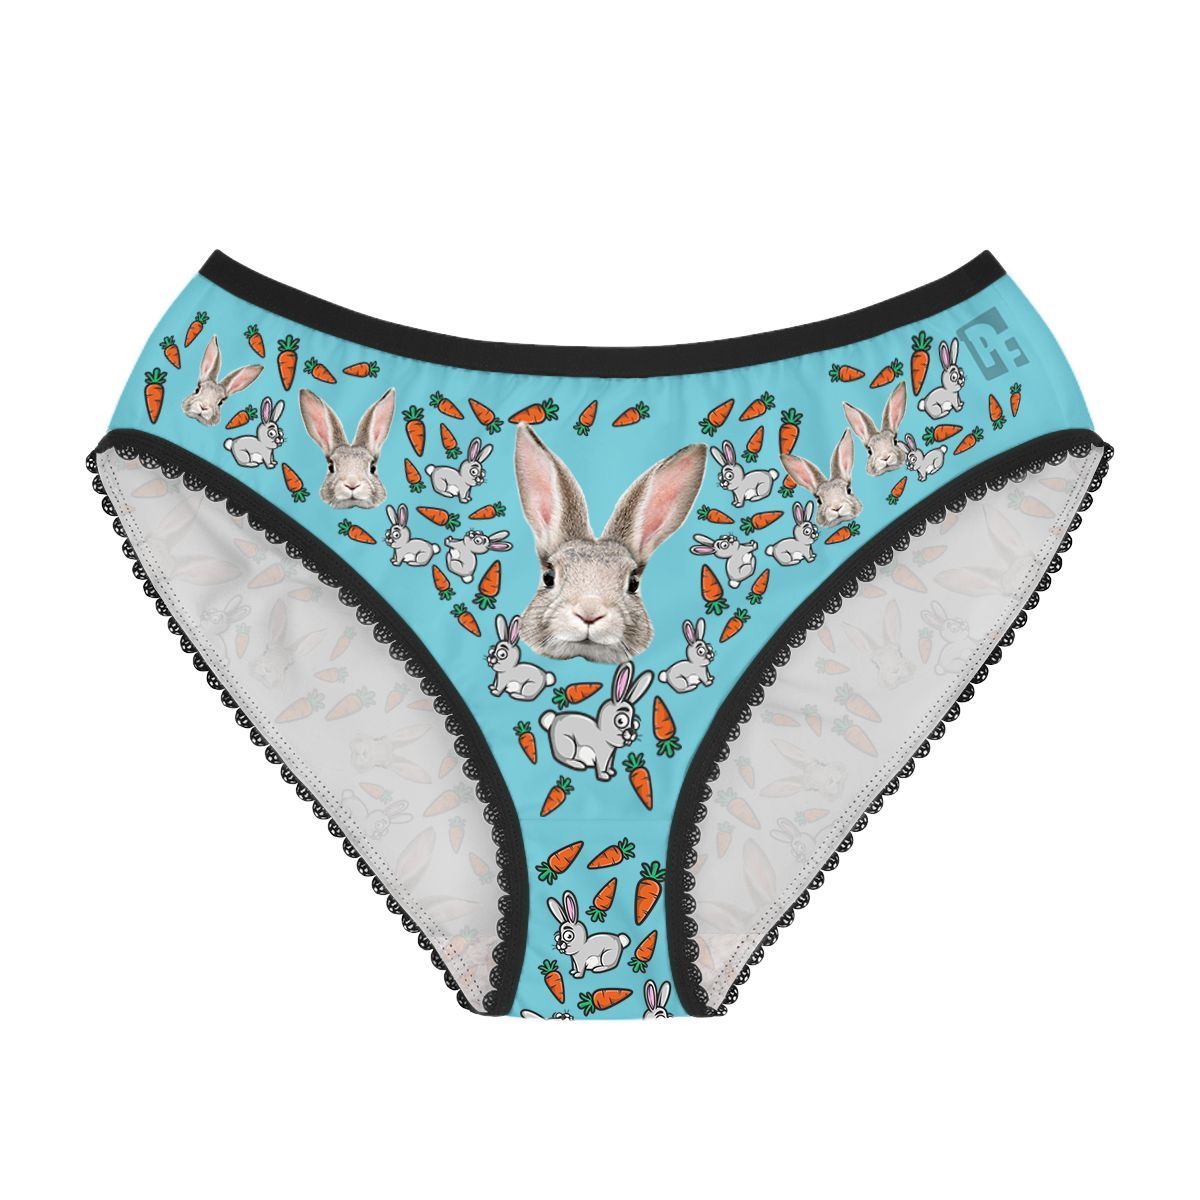 Blue Bunny women's underwear briefs personalized with photo printed on them